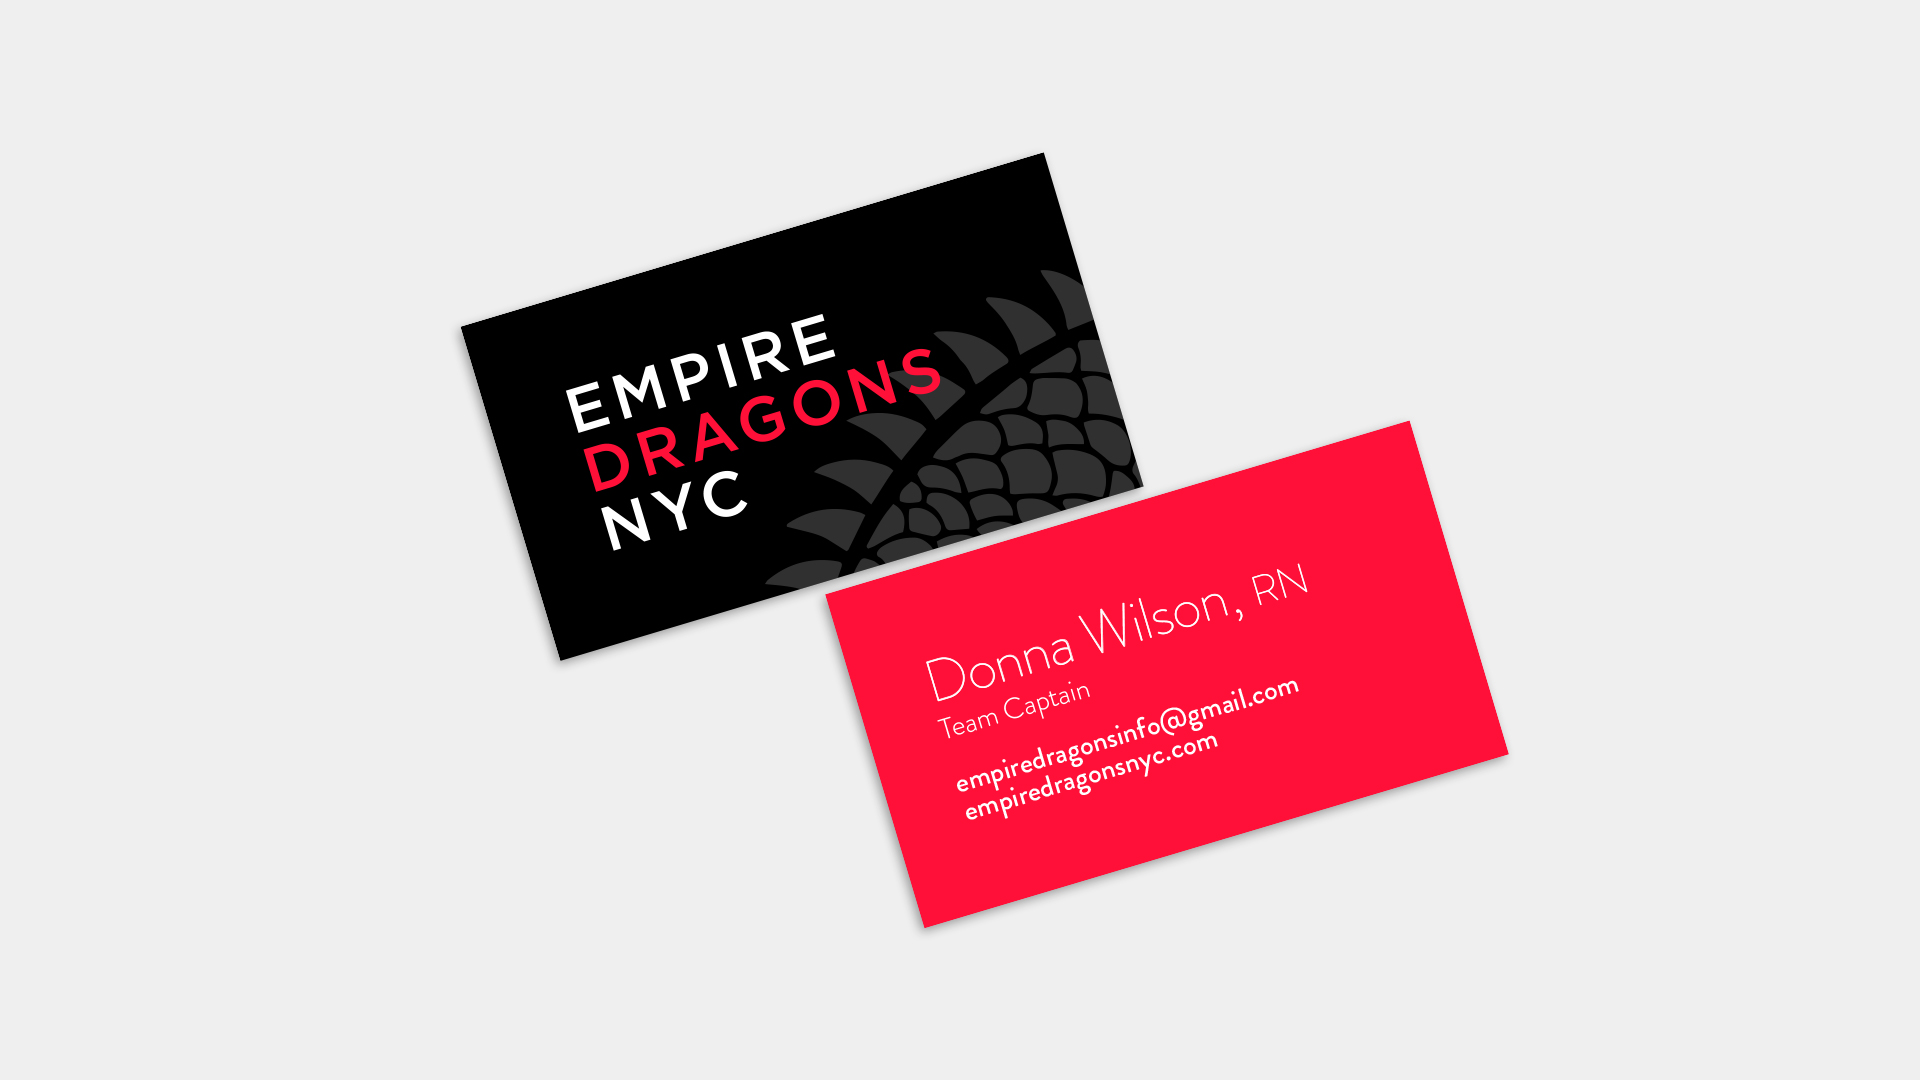 Empire Dragons NYC — Level Group